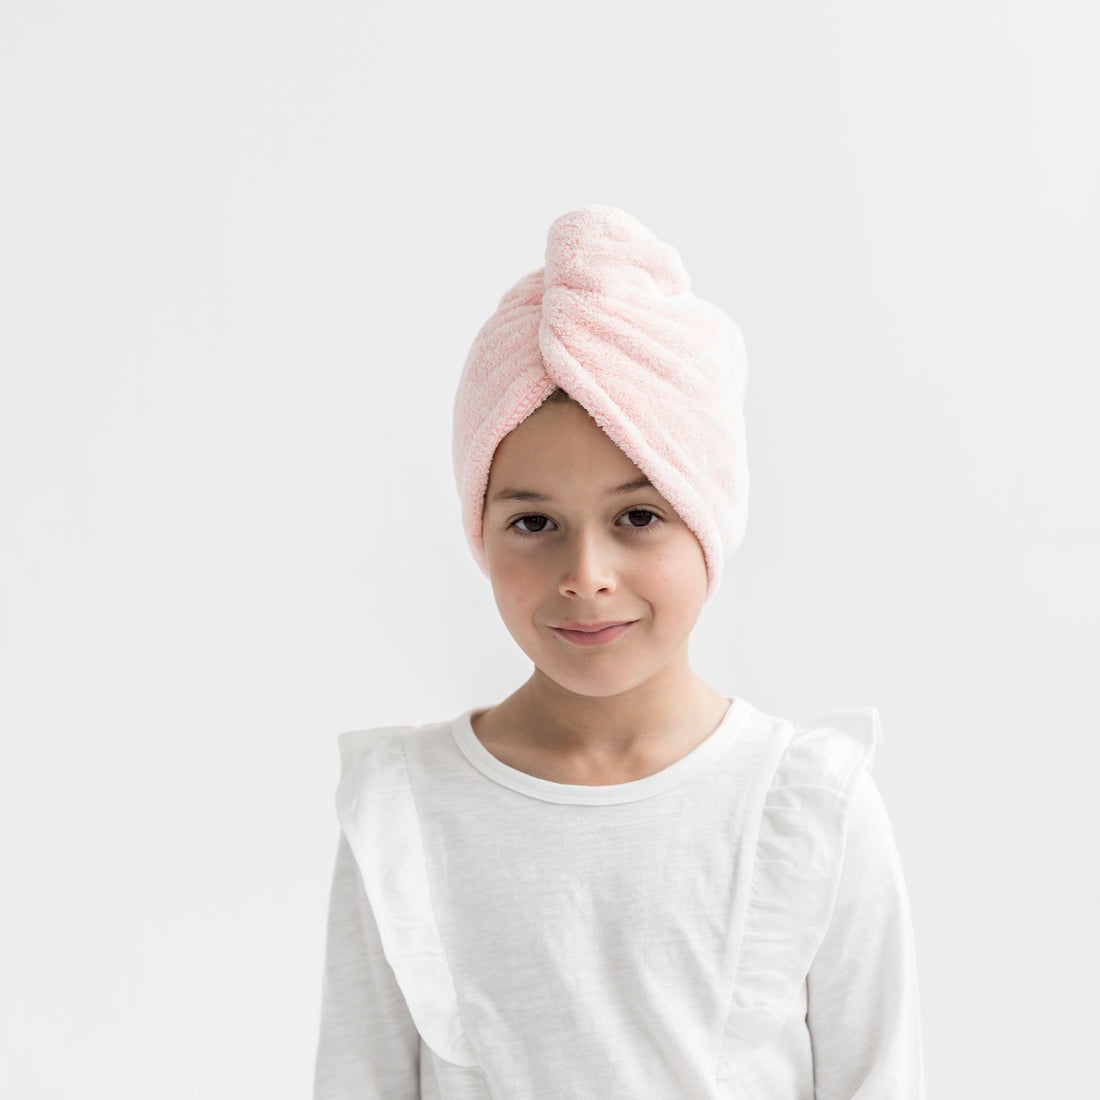 Quick Dry Microfiber Infant Bath Towels For Beach, Swimwear, Spa, And  Travel Magic Body Wraps, Hair Towel, Turban Robes, Hats, Camping Blankets  DYP365 From Twinsfamily, $1.65